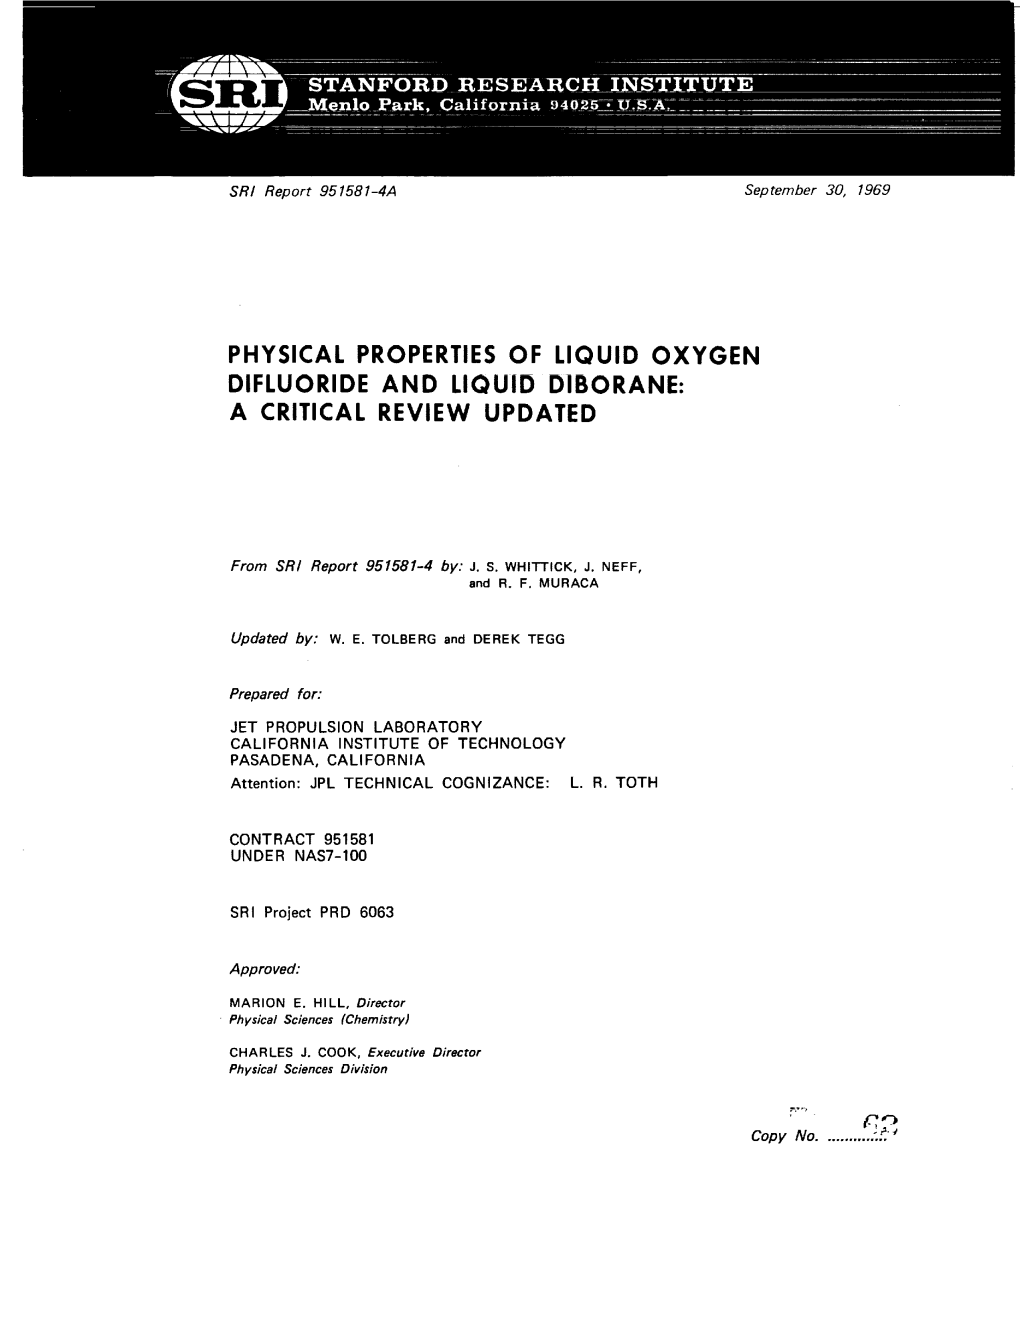 Physical Properties of Liquid Oxygen Difluoride and Liquid Diborane: a Critical Review Updated